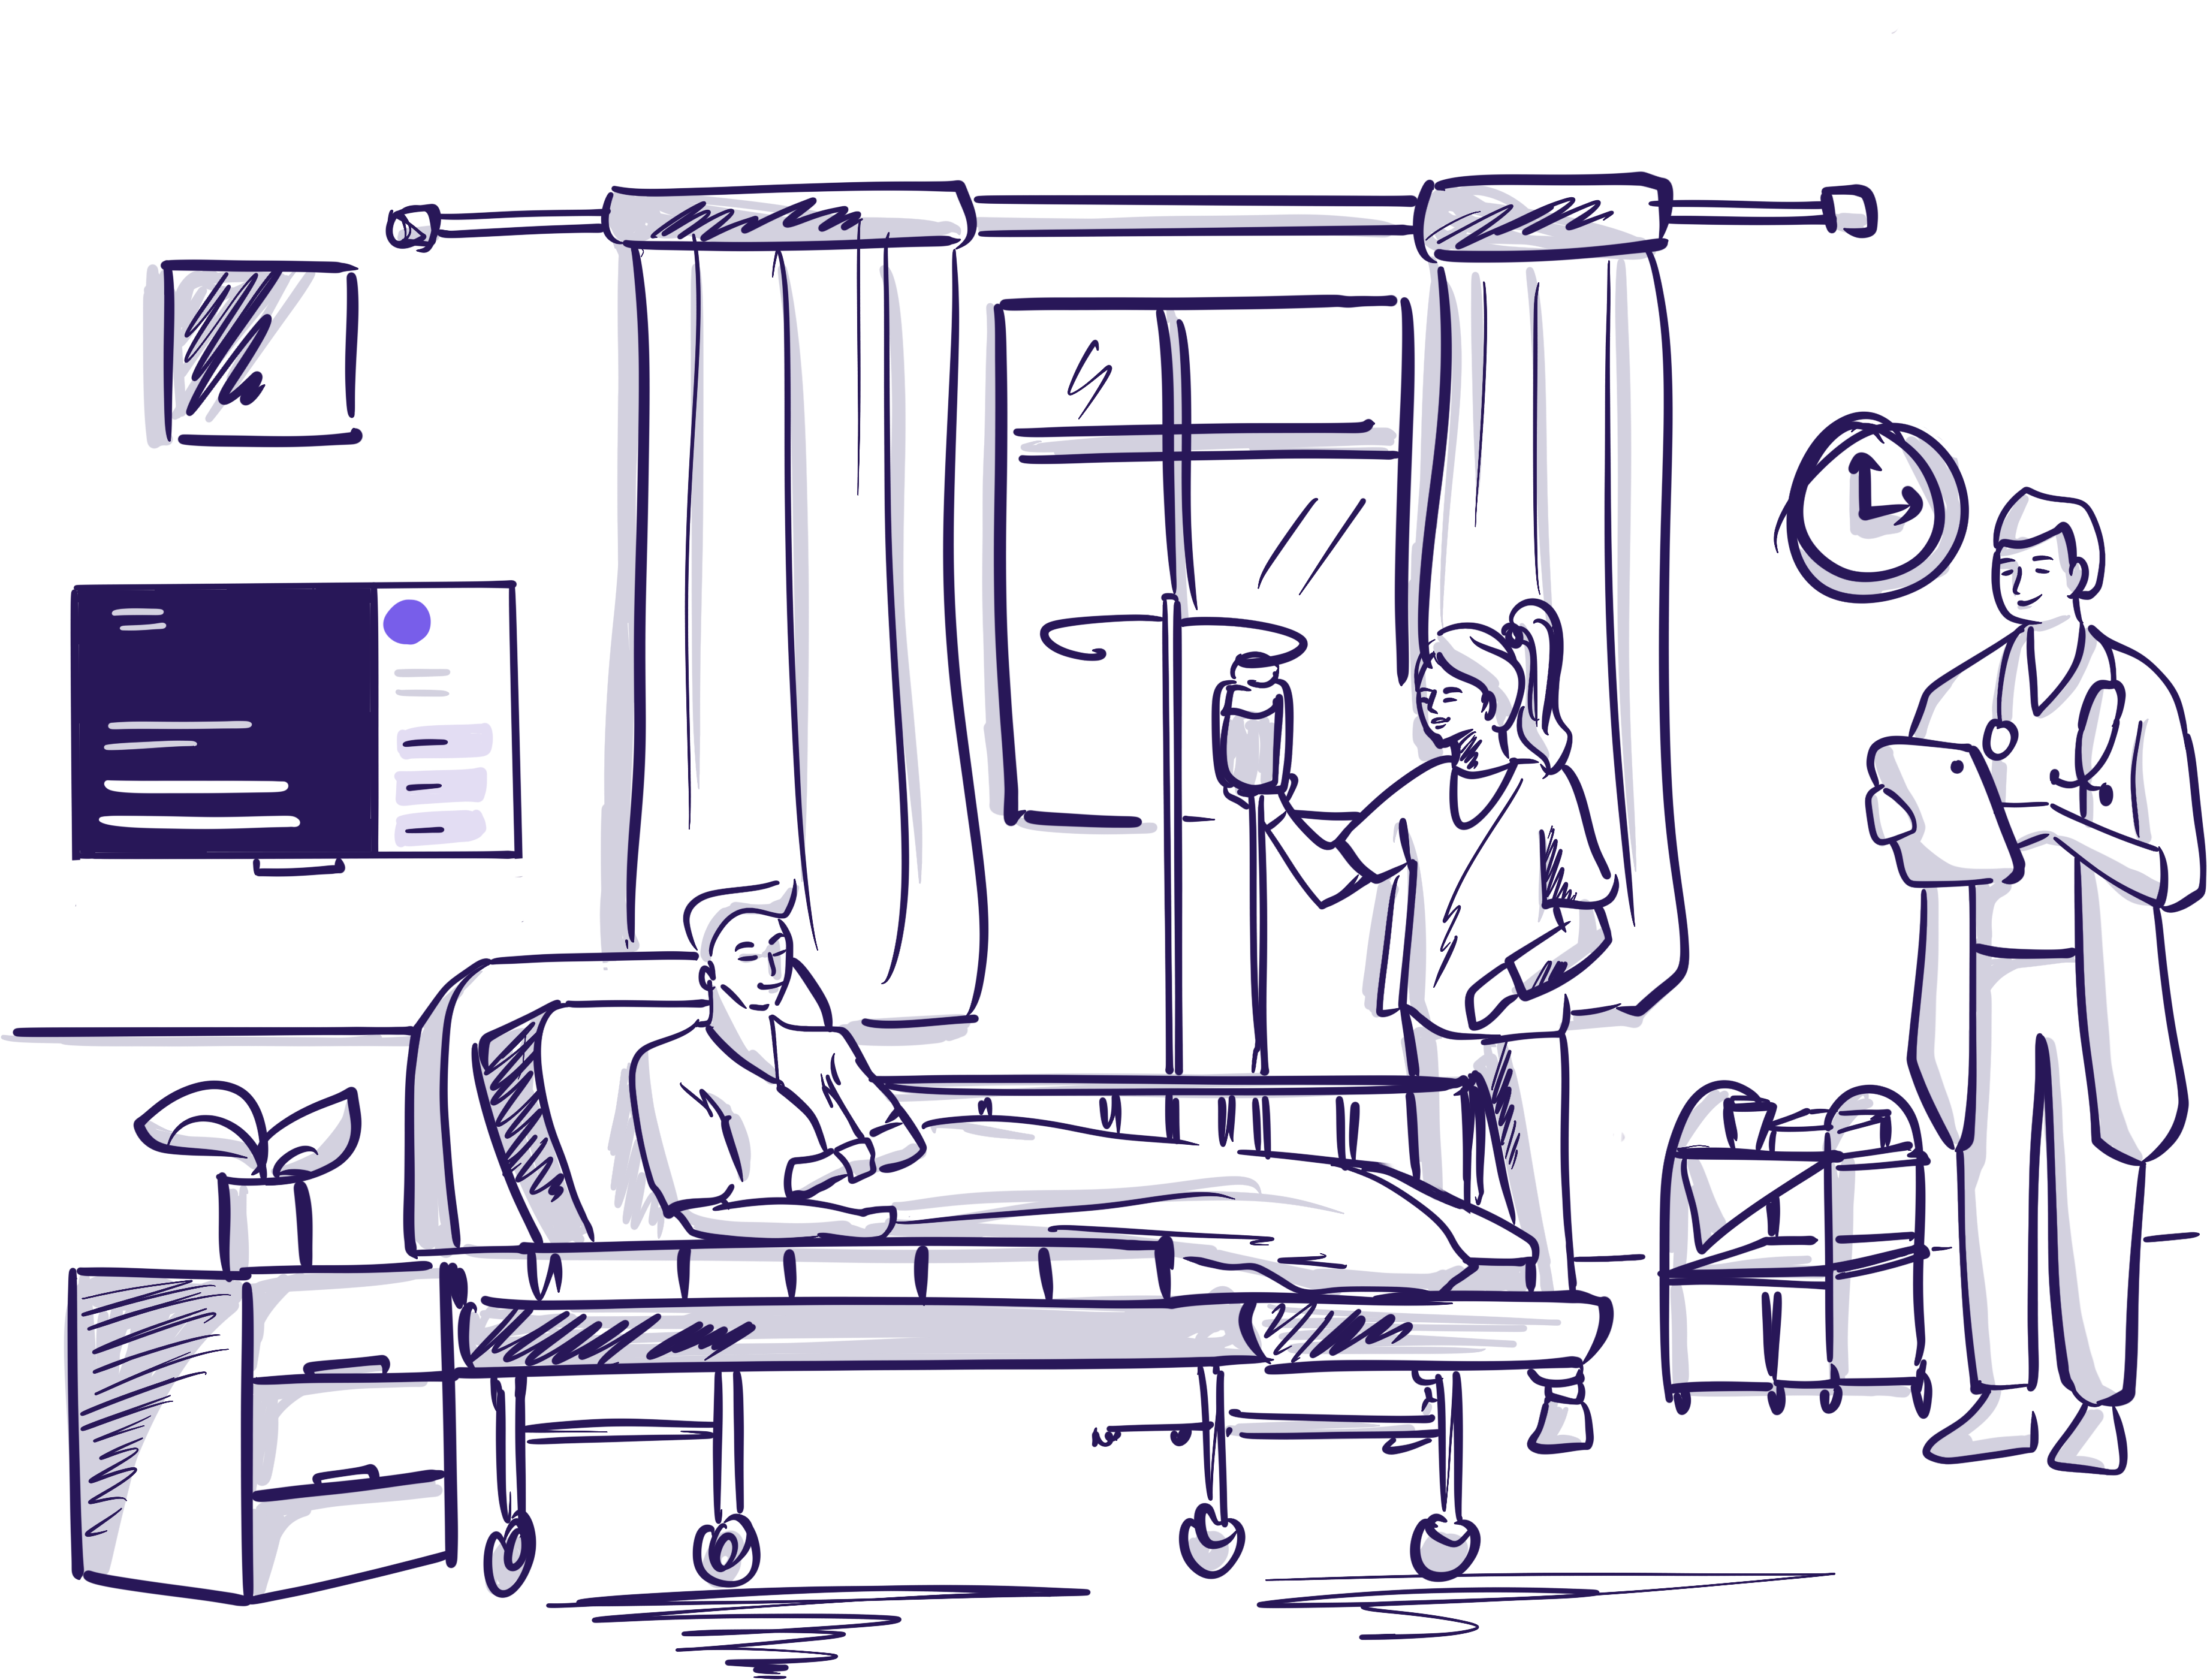 Illustration image of a man in a hospital bed, with a doctor and nurse in the room